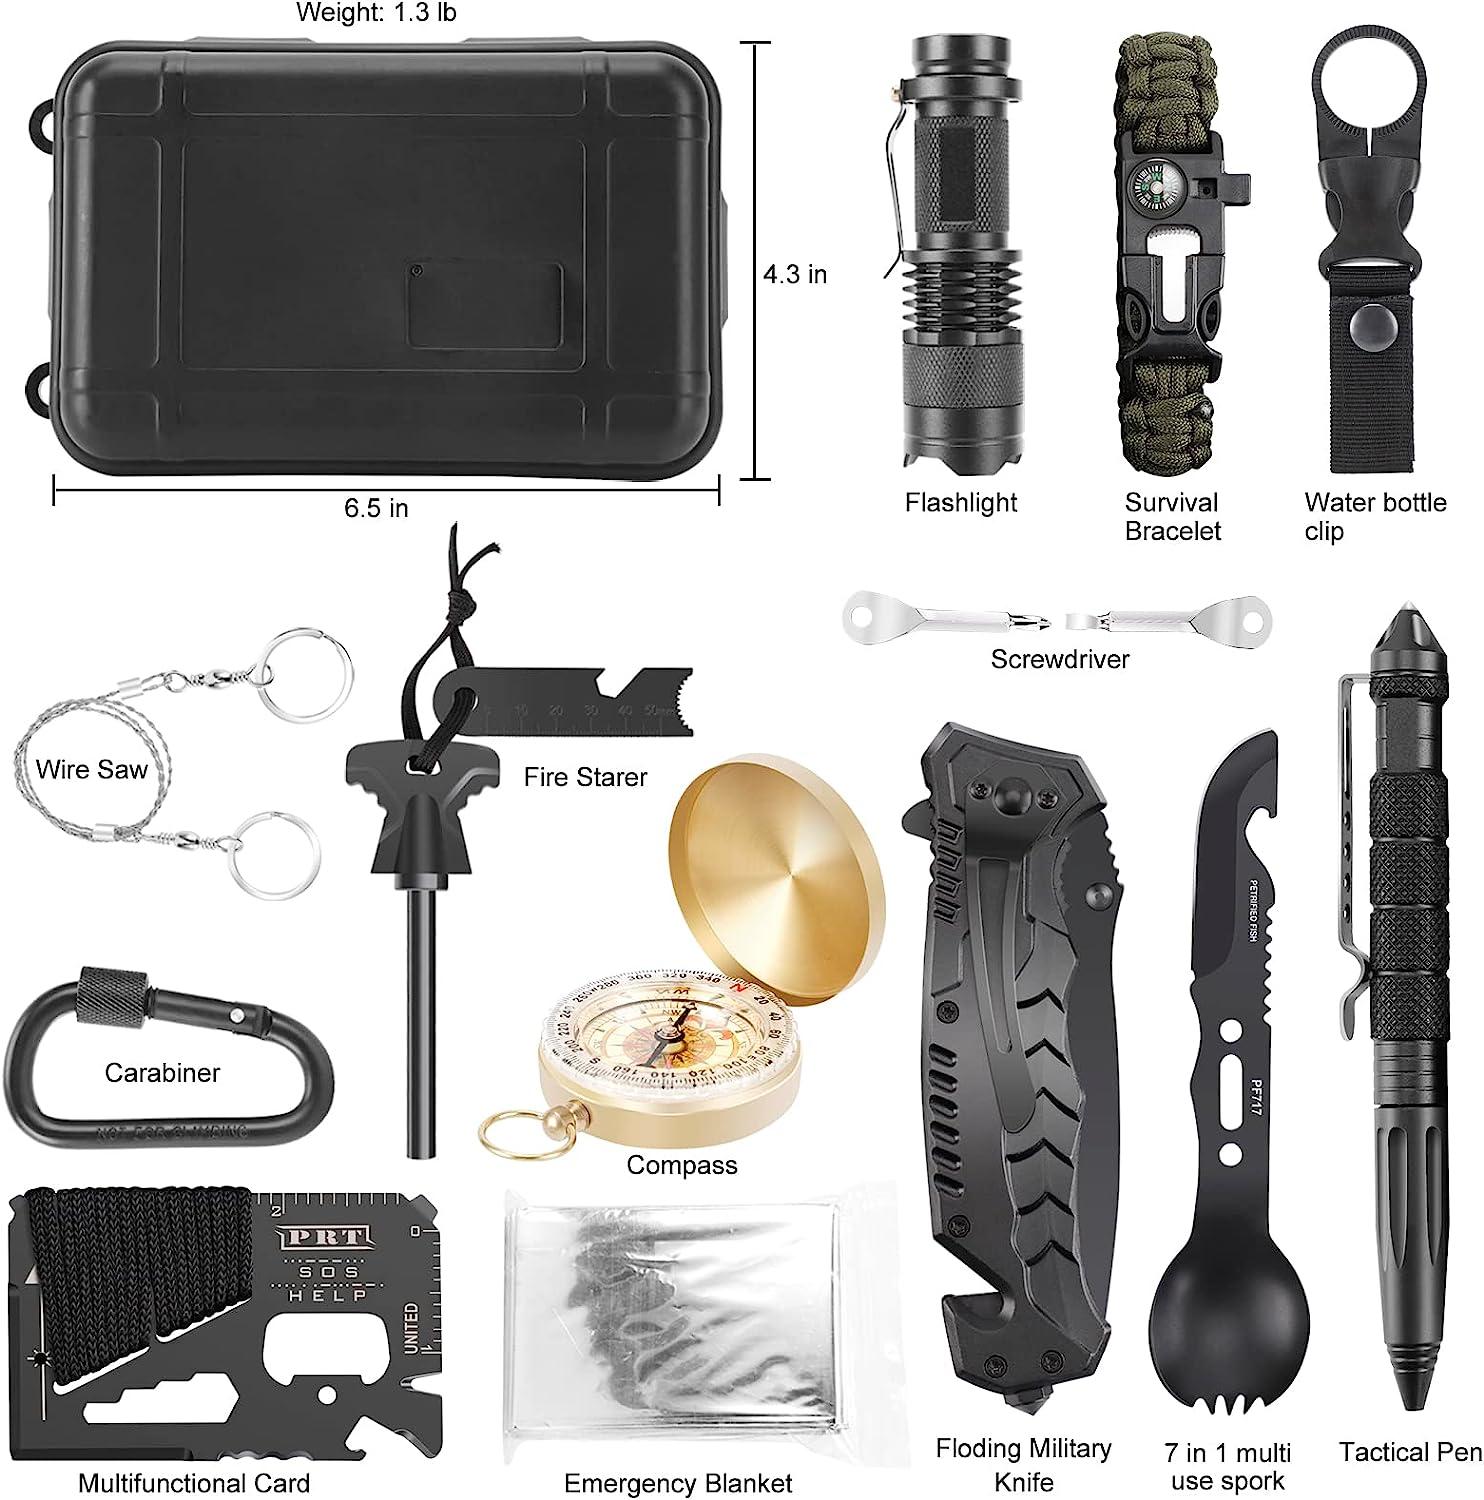 Gift For Men Dad Husband, 17 In 1, Survival Gear Tool Cool Gadgets  Emergency Survival Gear And Equipment Christmas Stocking Stuffed For Family  Hiking